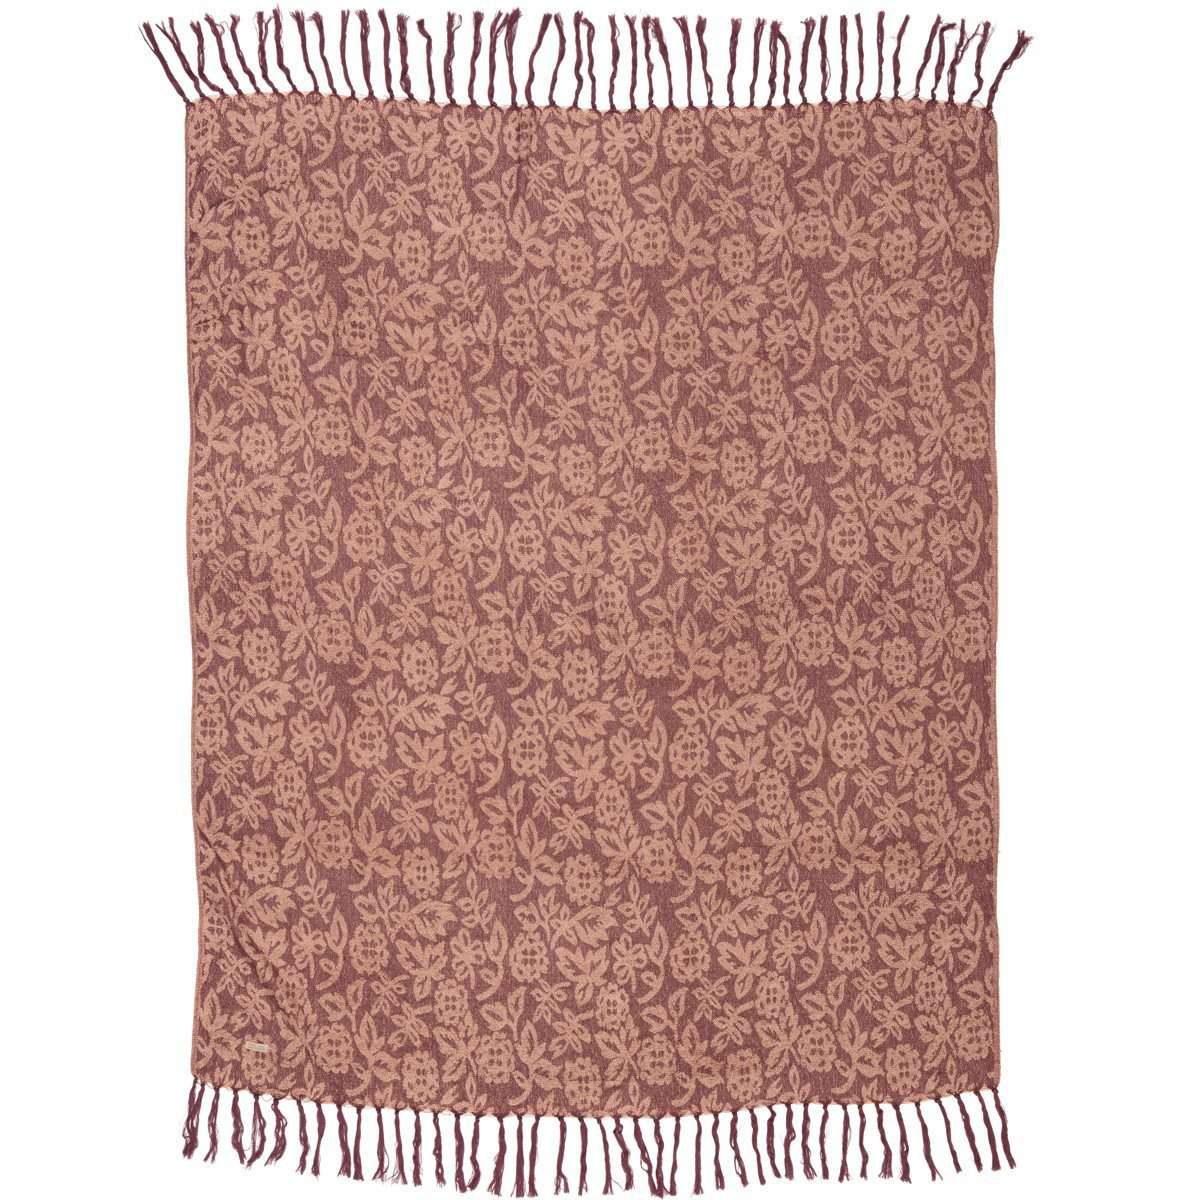 Berkeley Chenille Jacquard Woven Throw 60" x 50" Berry Red, Dusty Pink VHC Brands - The Fox Decor